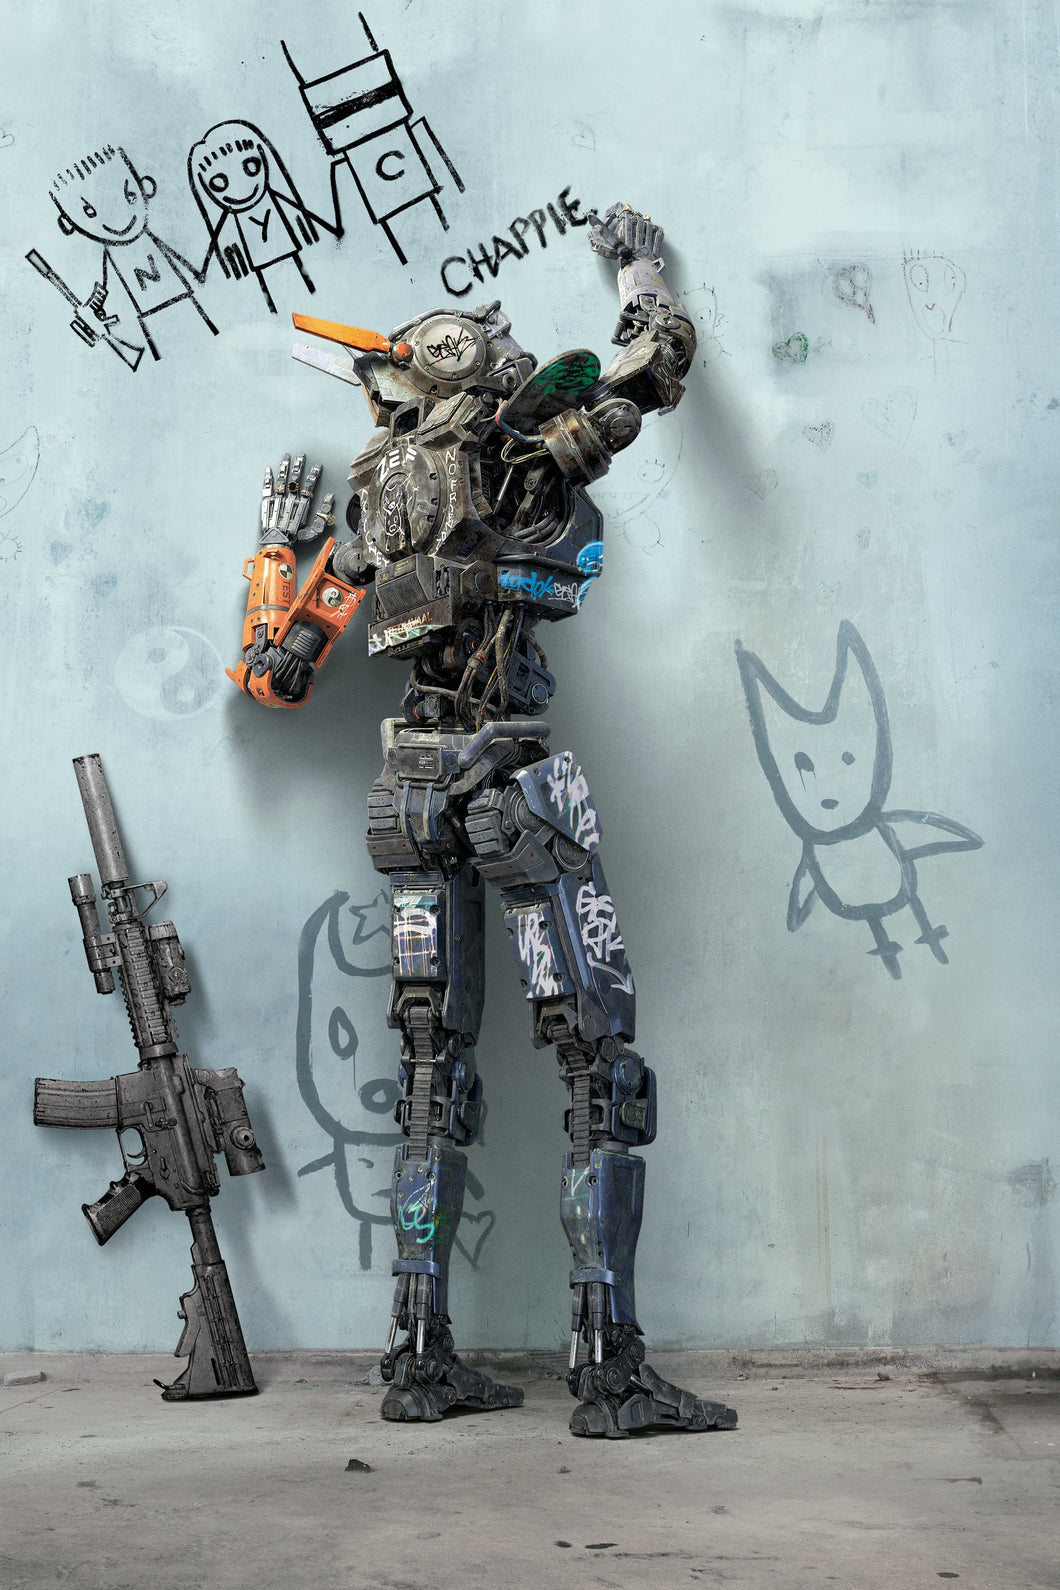 Chappie (2015) V2 Movie Poster Framed or Unframed Glossy Poster Free UK Shipping!!!